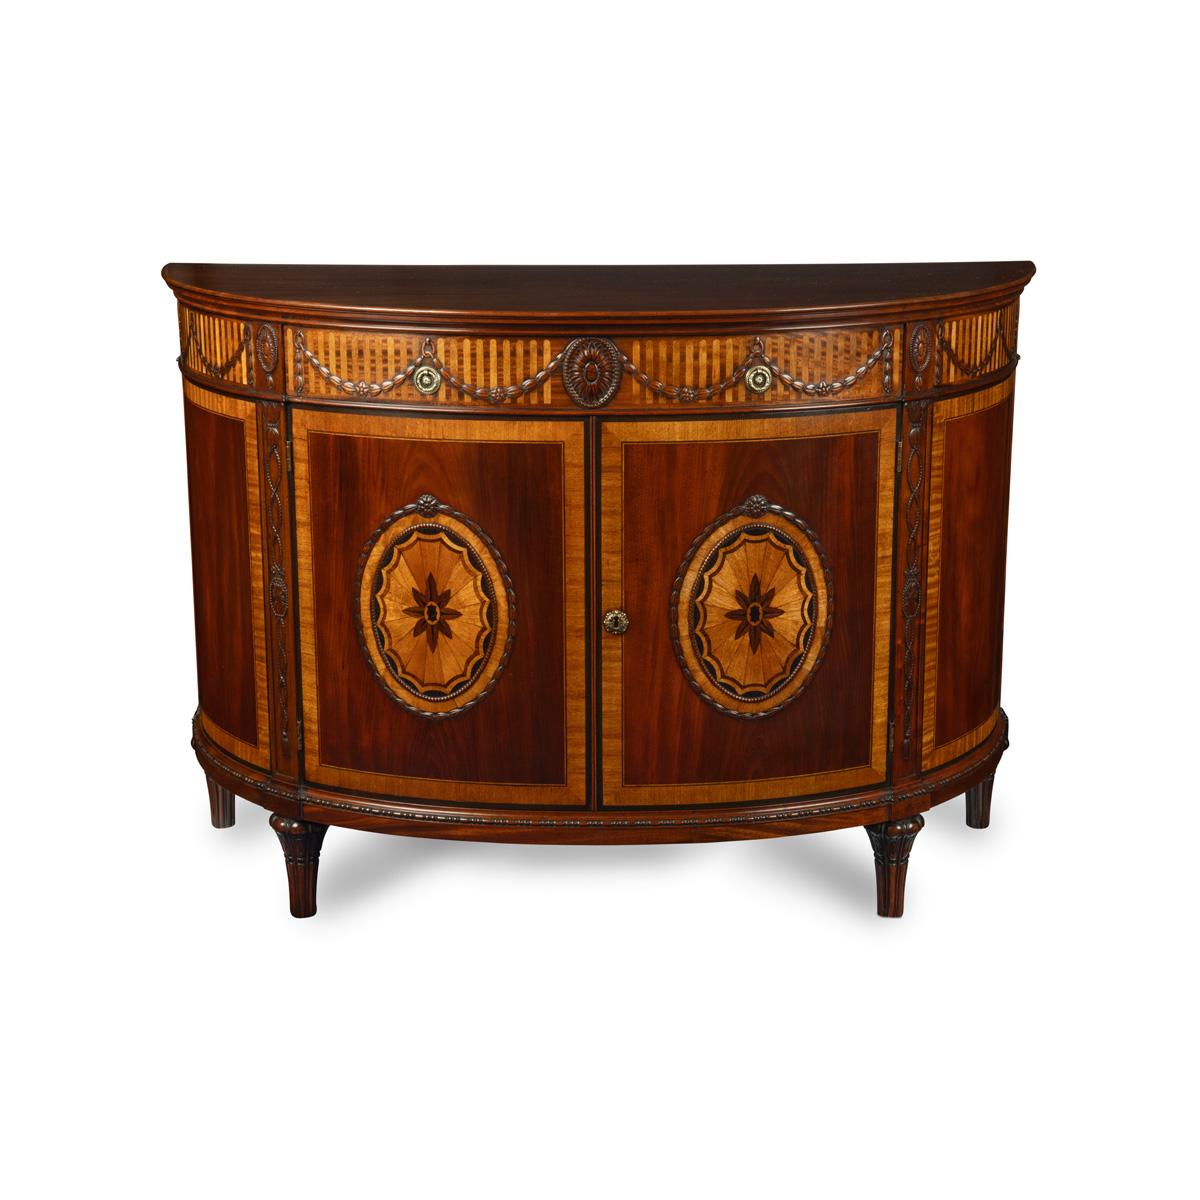 A pair of Edwardian mahogany commodes, each of semi-circular form with a single oak-lined frieze drawer above a pair of doors which open to reveal three sliding shelves, decorated with satinwood blind fluting and marquetry around the frieze, the